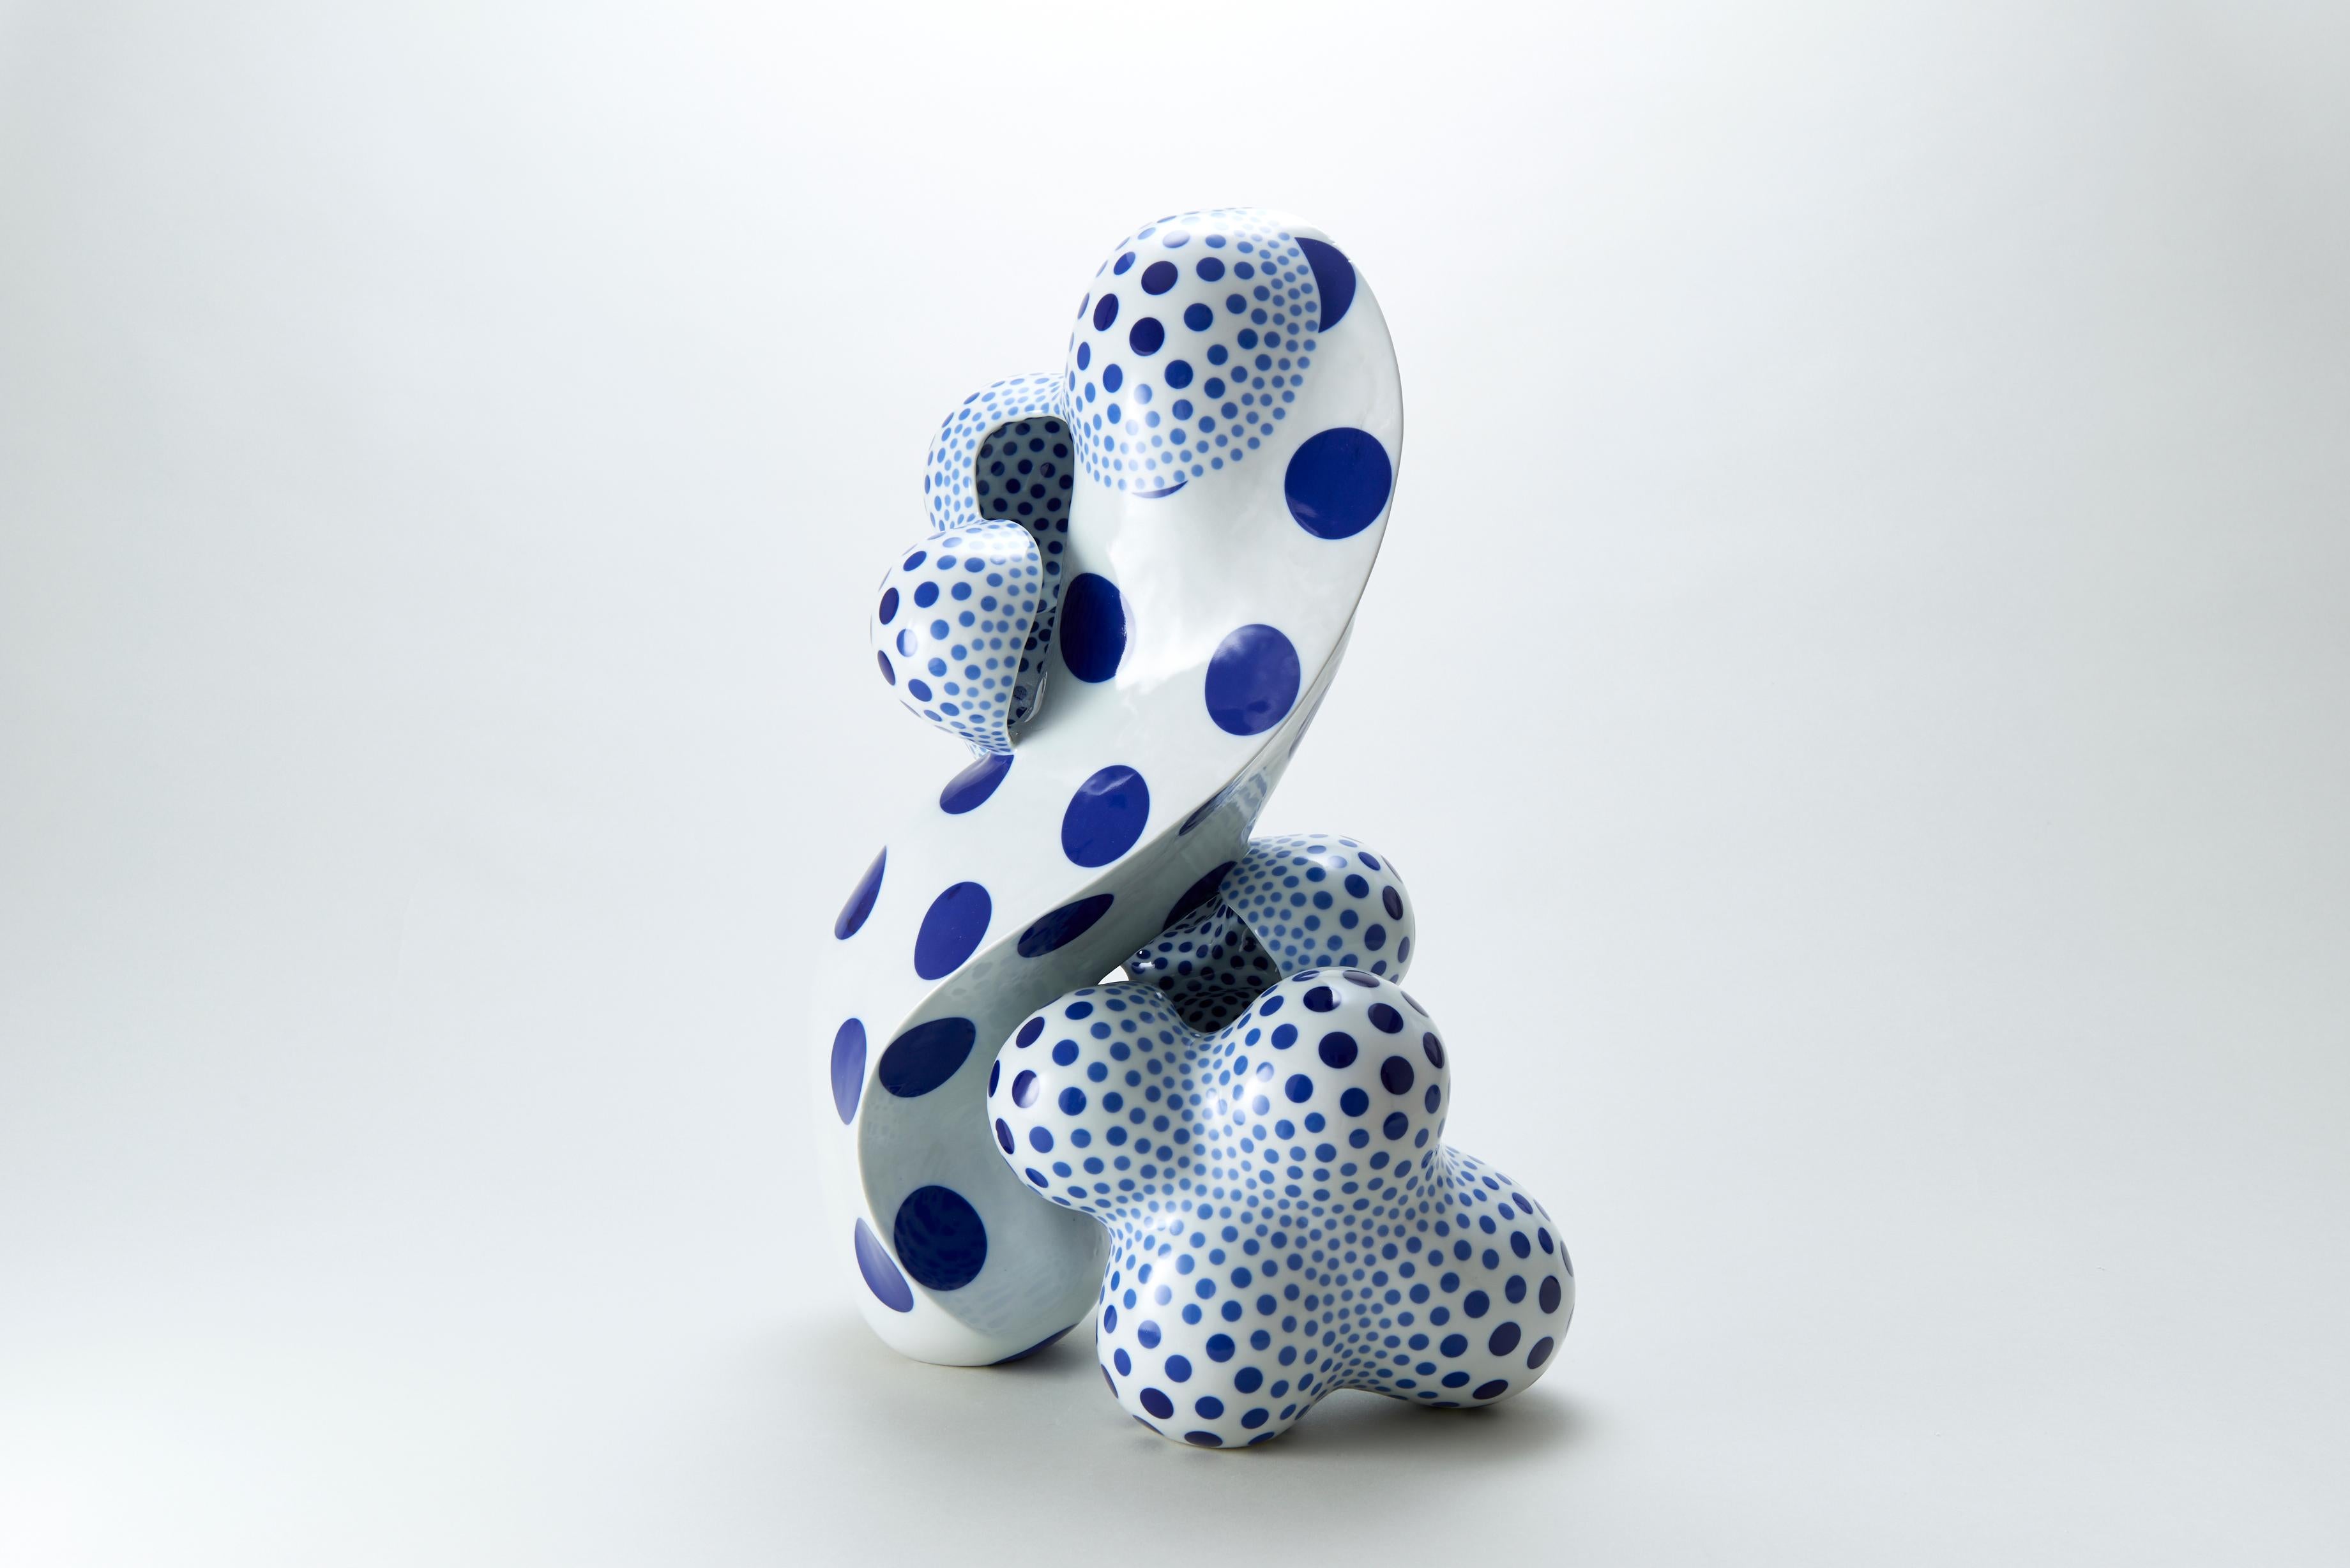 "A Disclosing Form 1610", Abstract Ceramic Sculpture, Glazed Surface, Porcelain